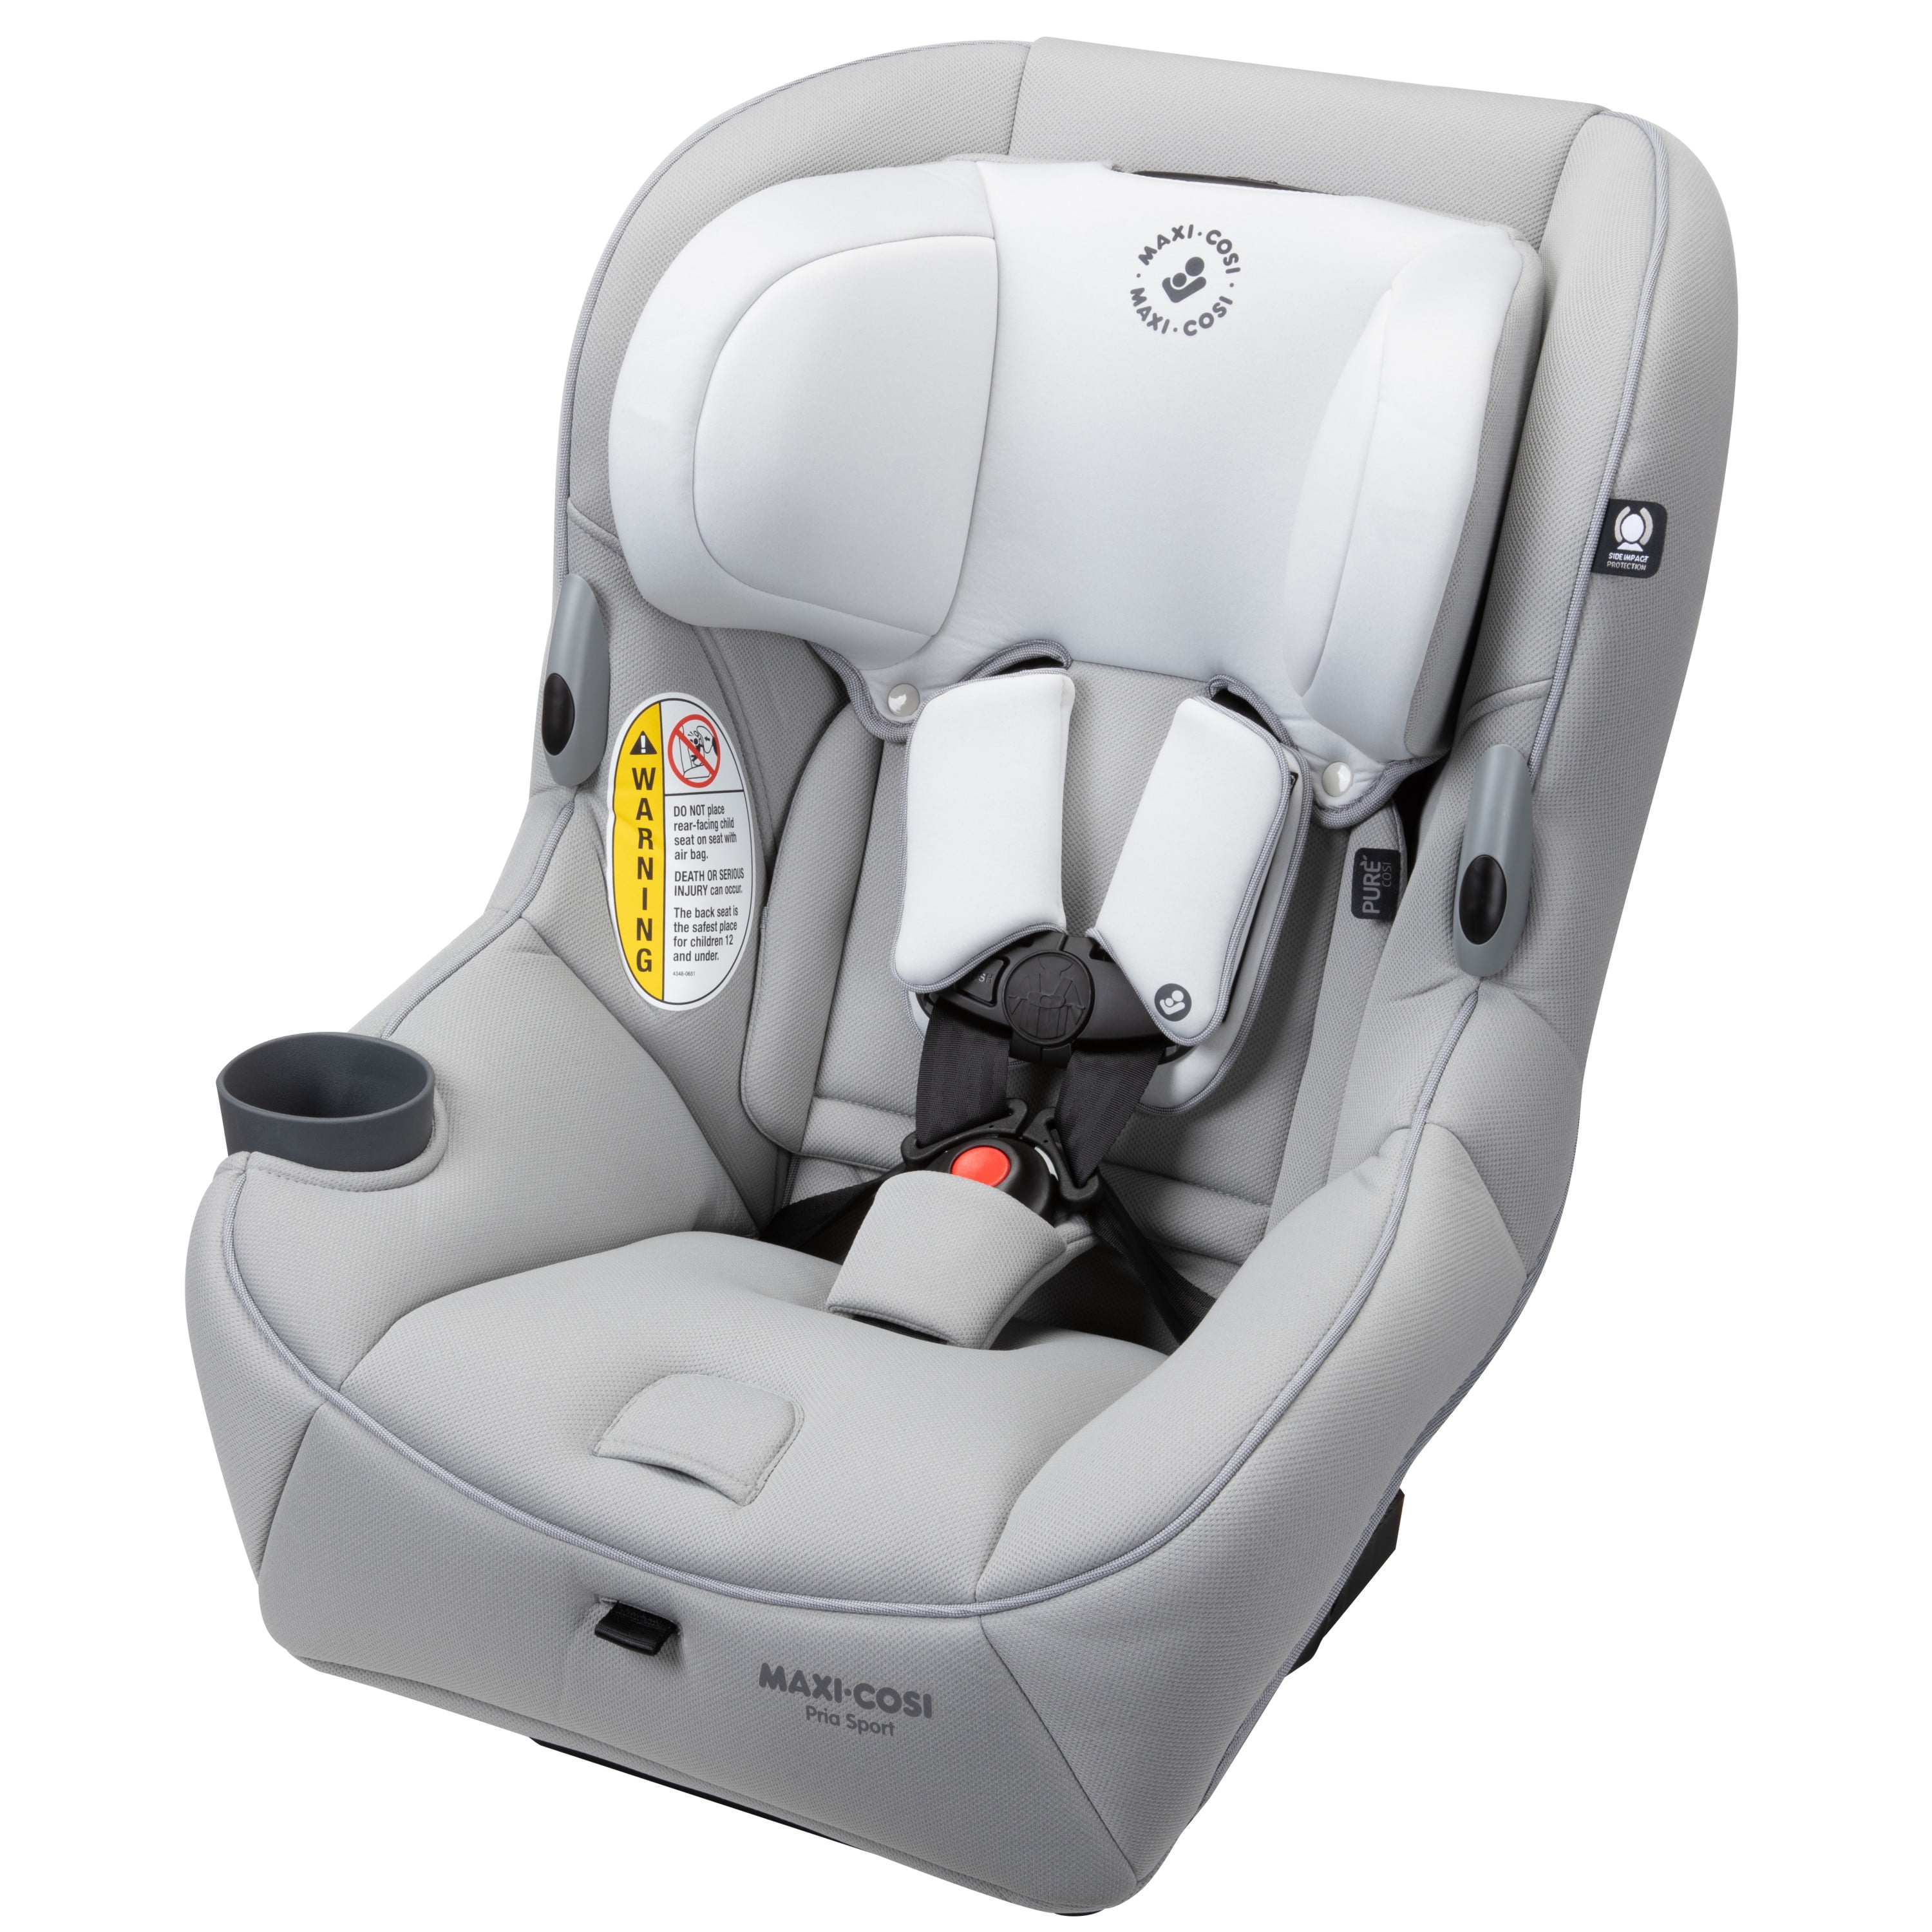 Maxi Cosi Pebble Car Seat Replacement Cover Set Genuine NEW 